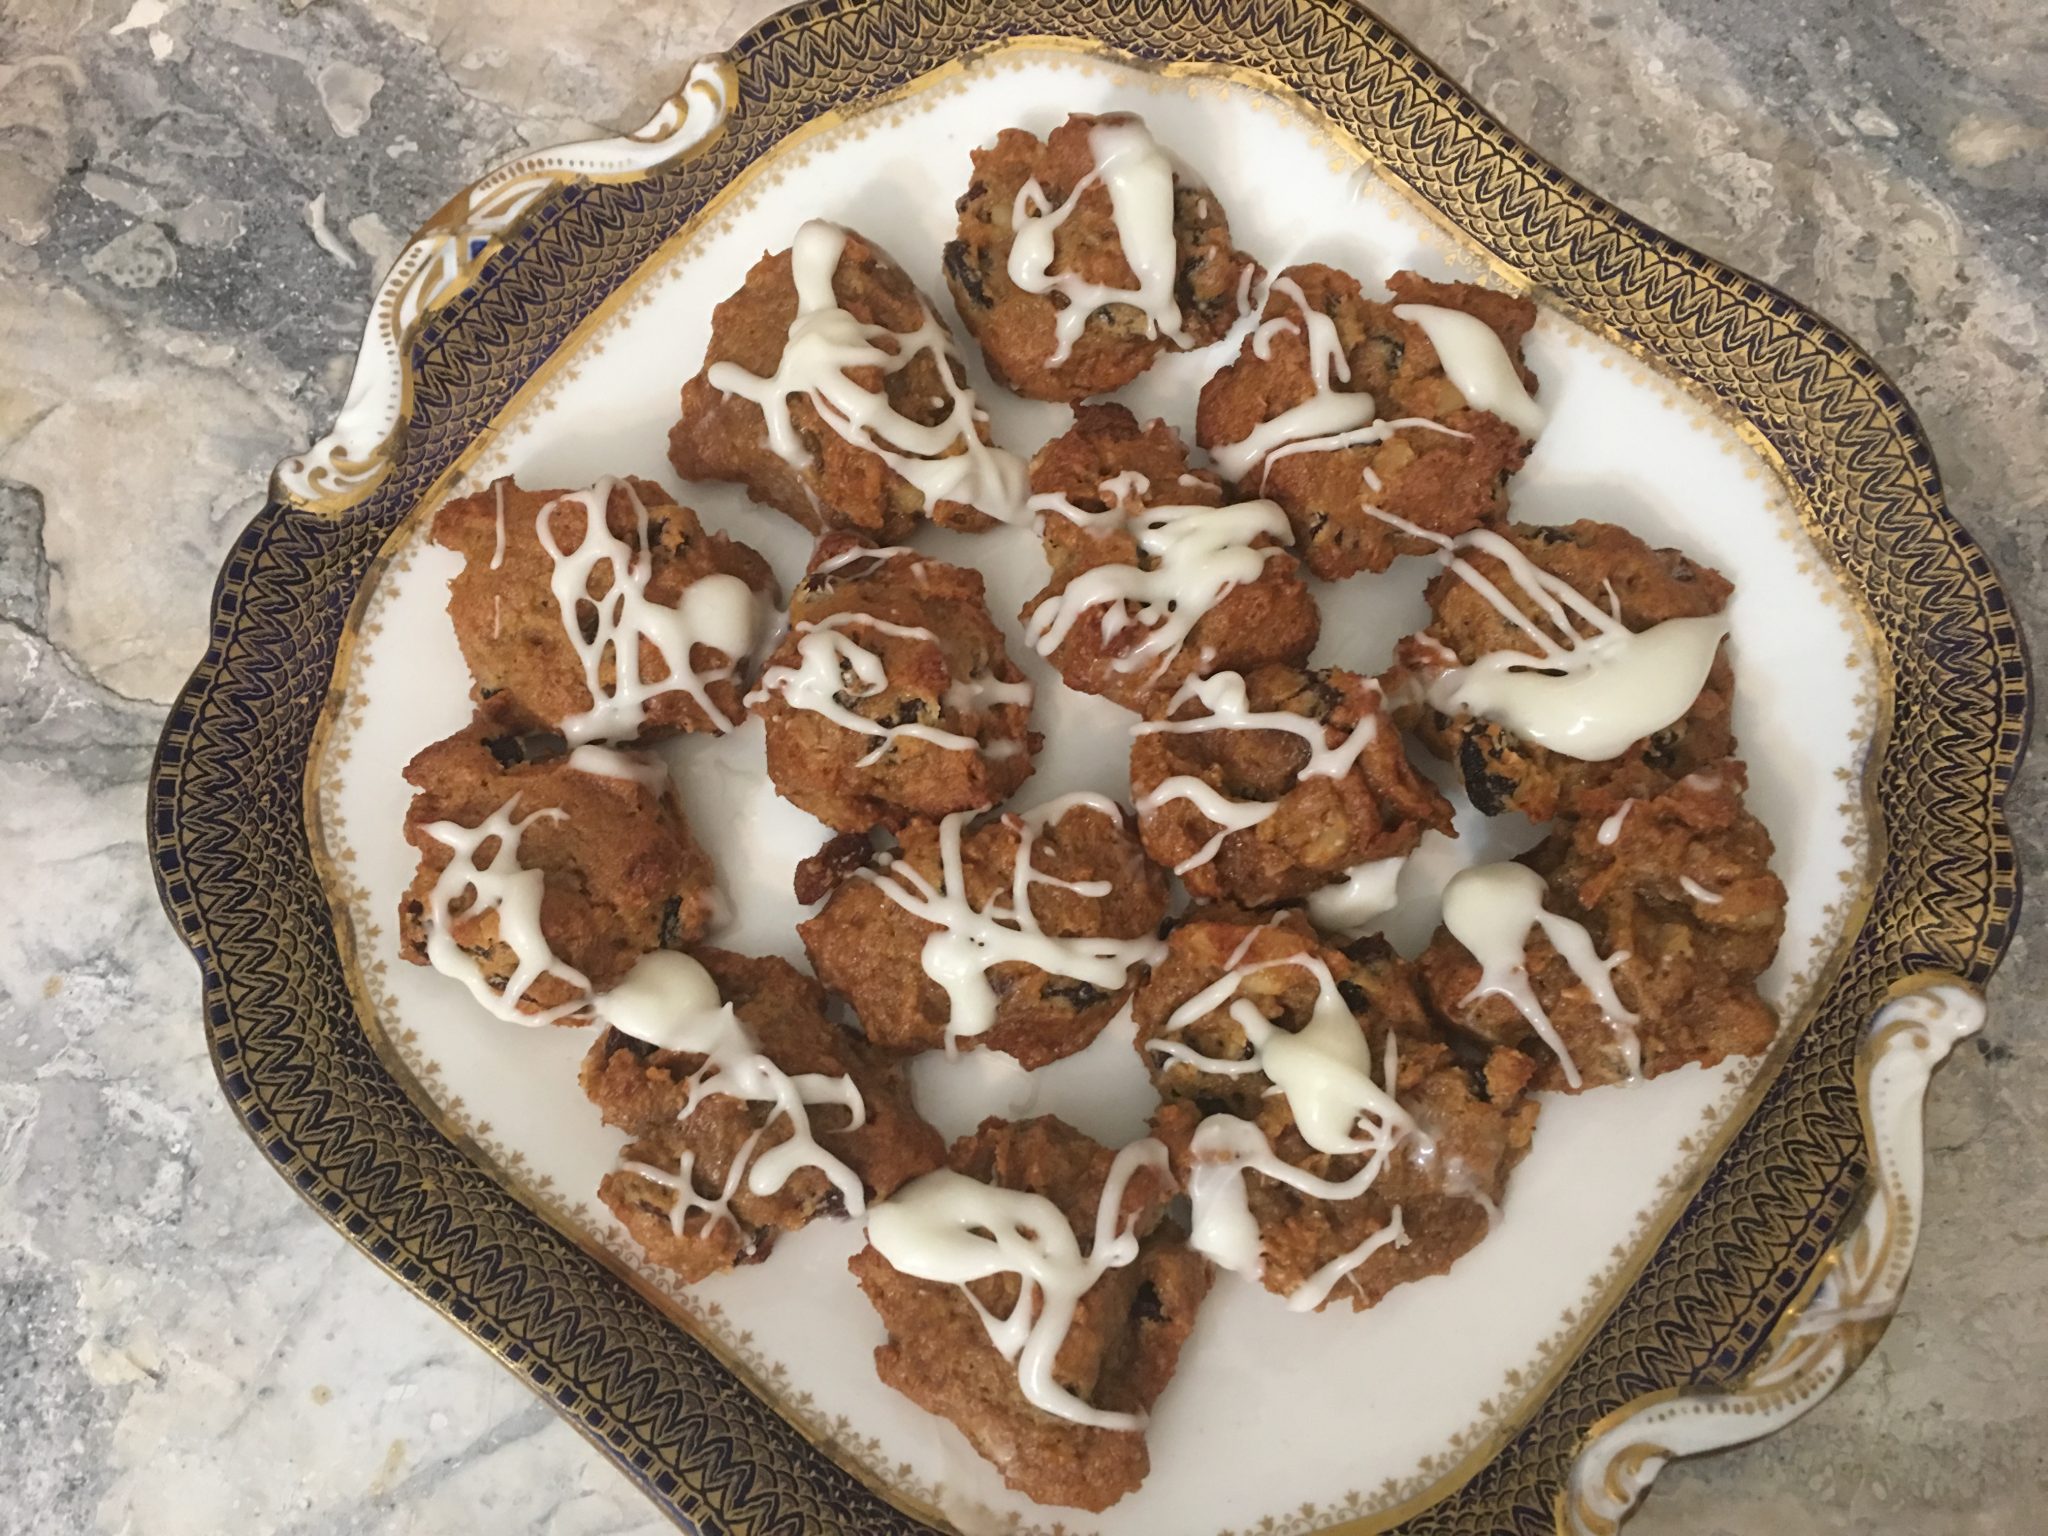 Plump persimmon cookies on a square white dessert plate with gold and navy trim, drizzled with white icing and set on a marble countertop